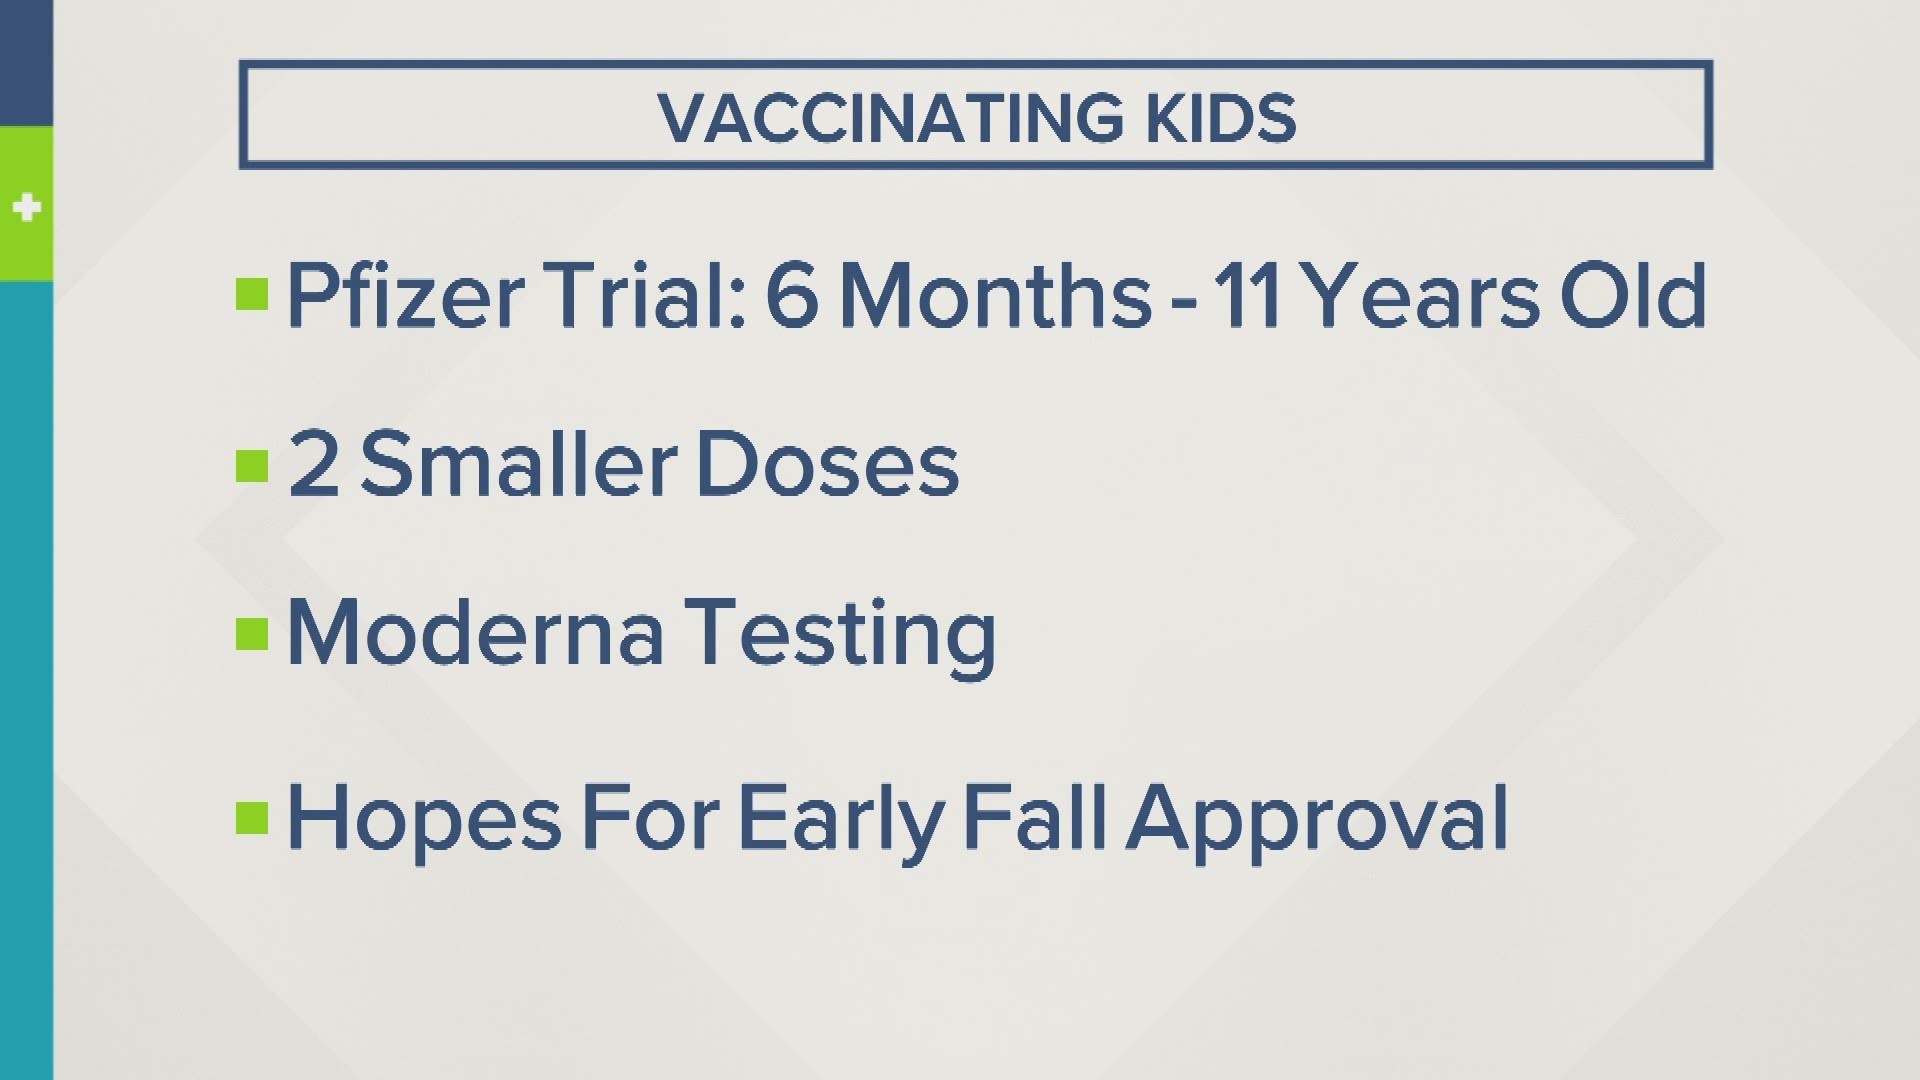 It's been over 24 hours since Marion County lifted its mask mandate for everyone who is fully vaccinated.